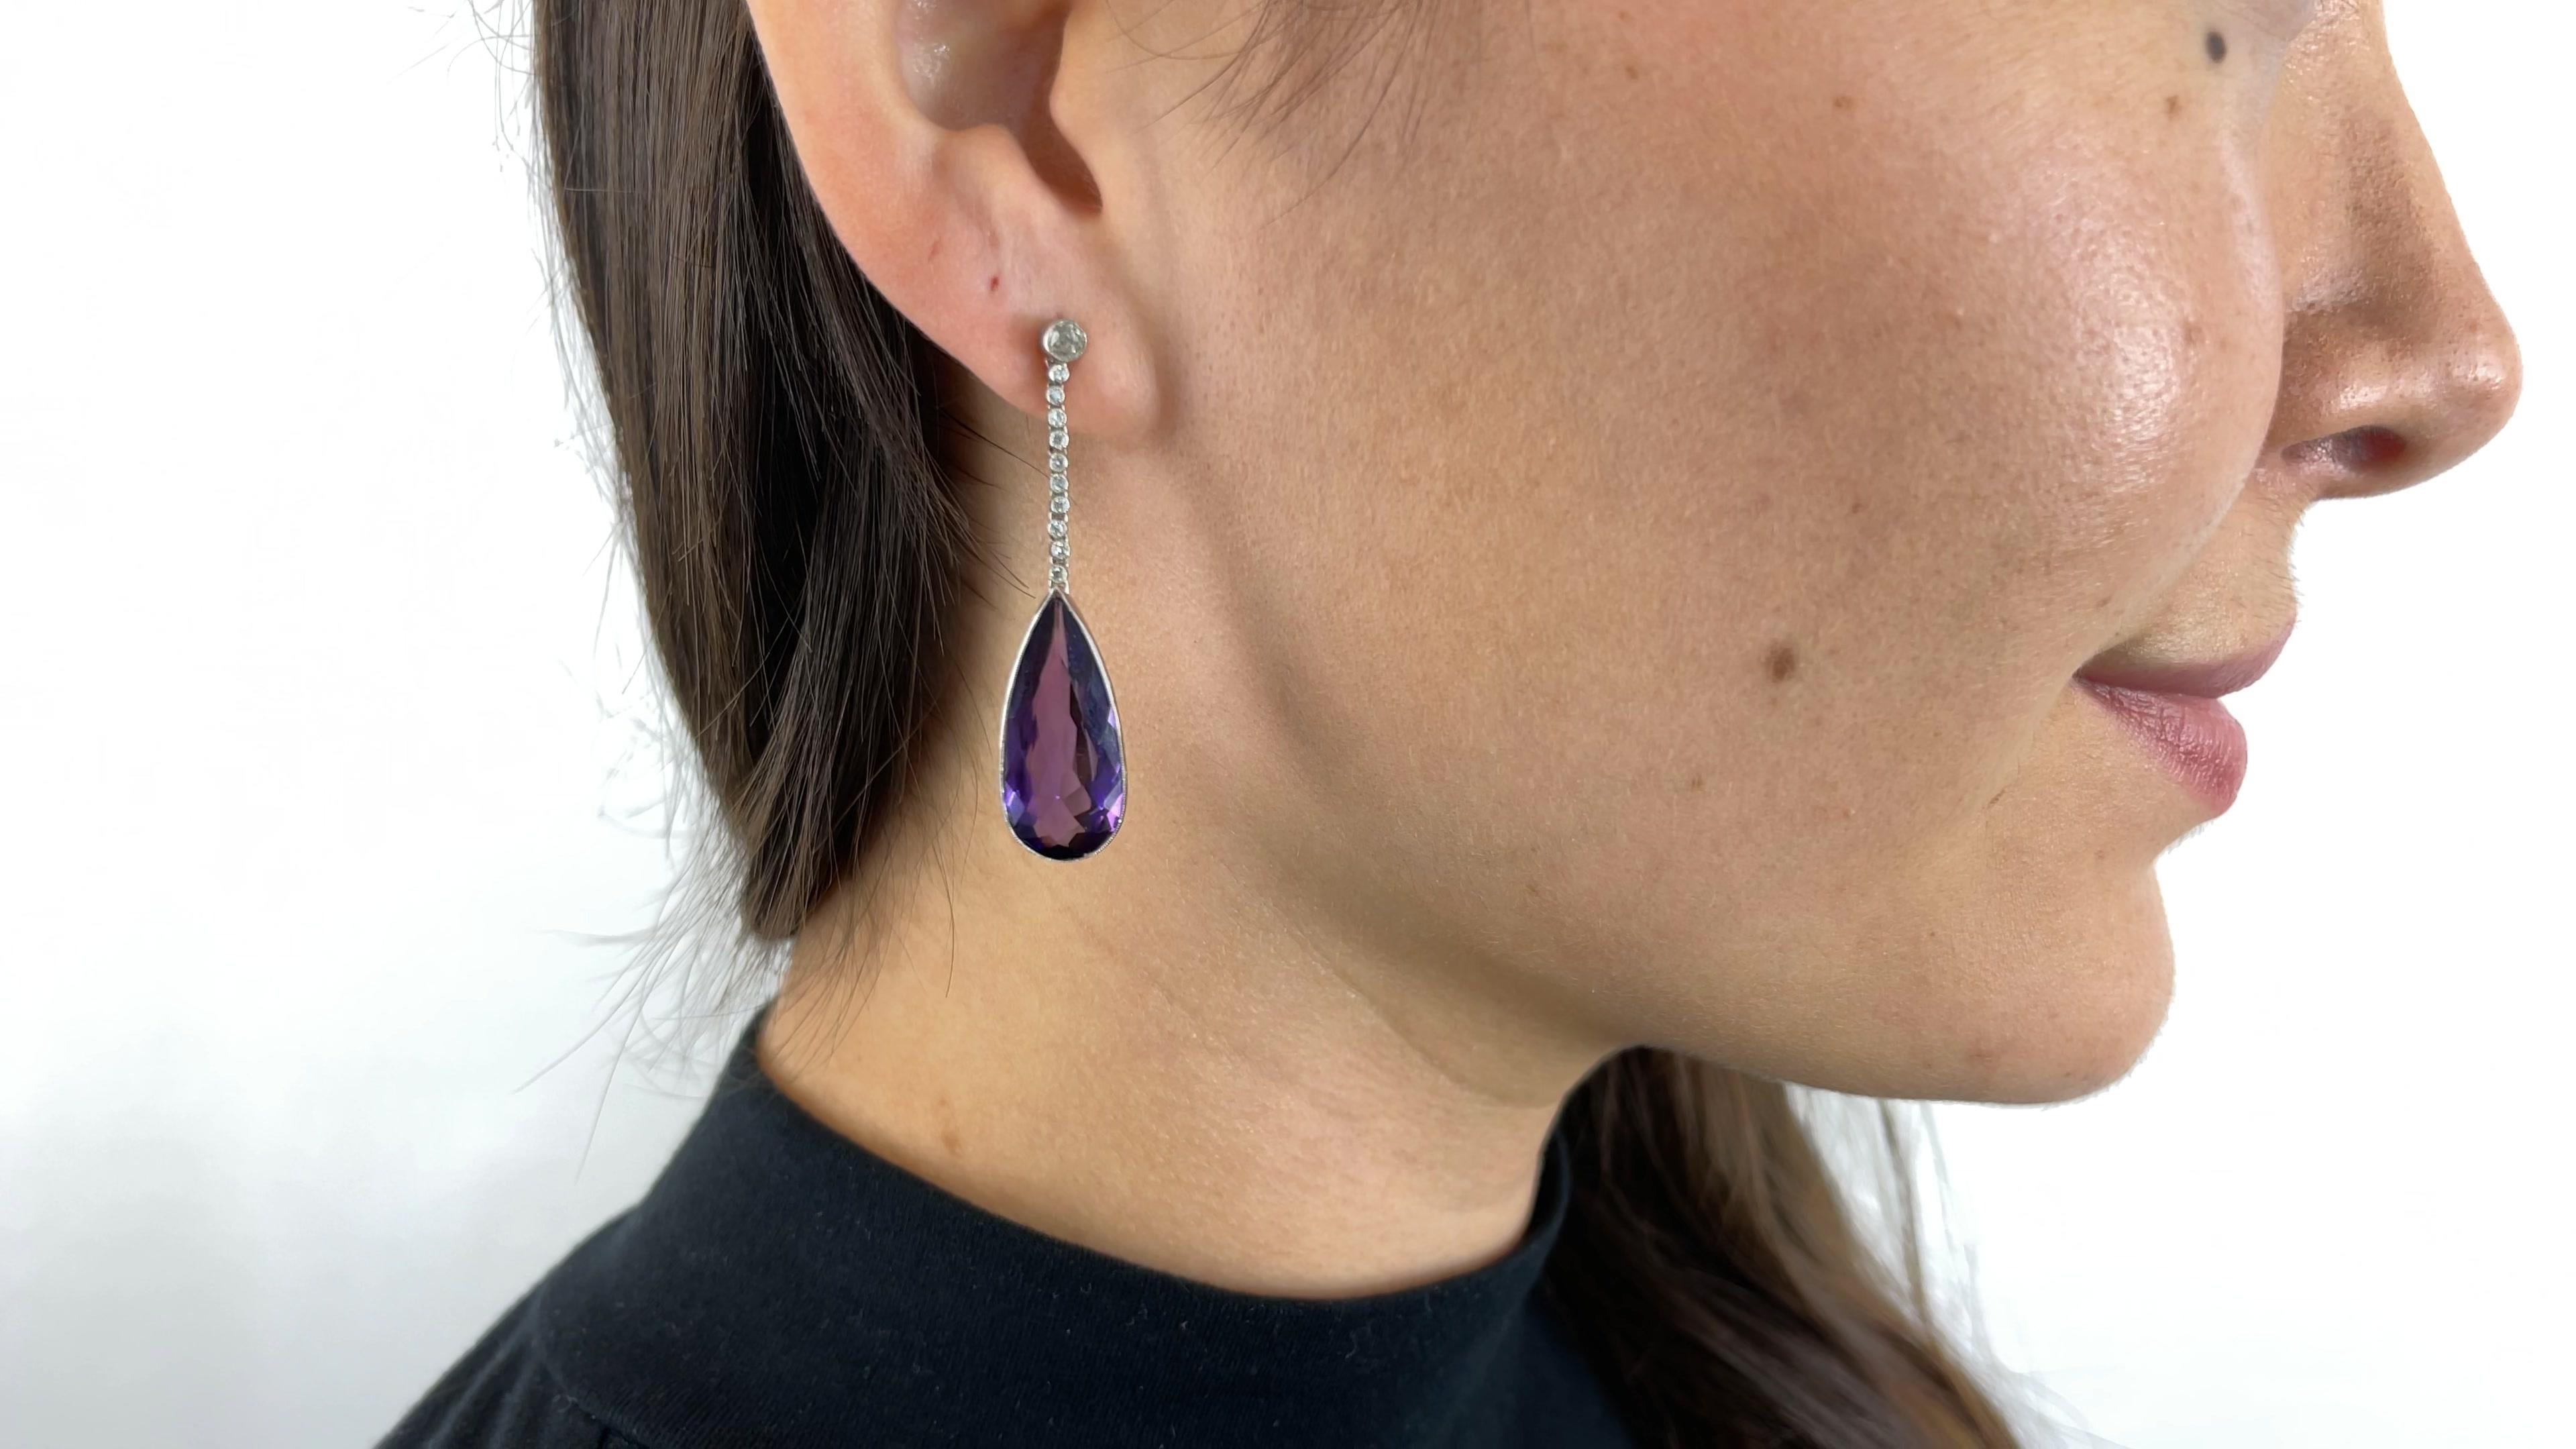 One Pair of Art Deco Inspired Amethyst Diamond Drop Earrings. Featuring two pear shaped amethysts weighing approximately 6.80 carat and 6.40 carat. Accented by 22 old European cut diamonds with a total weight of approximately 0.40 carats, graded H